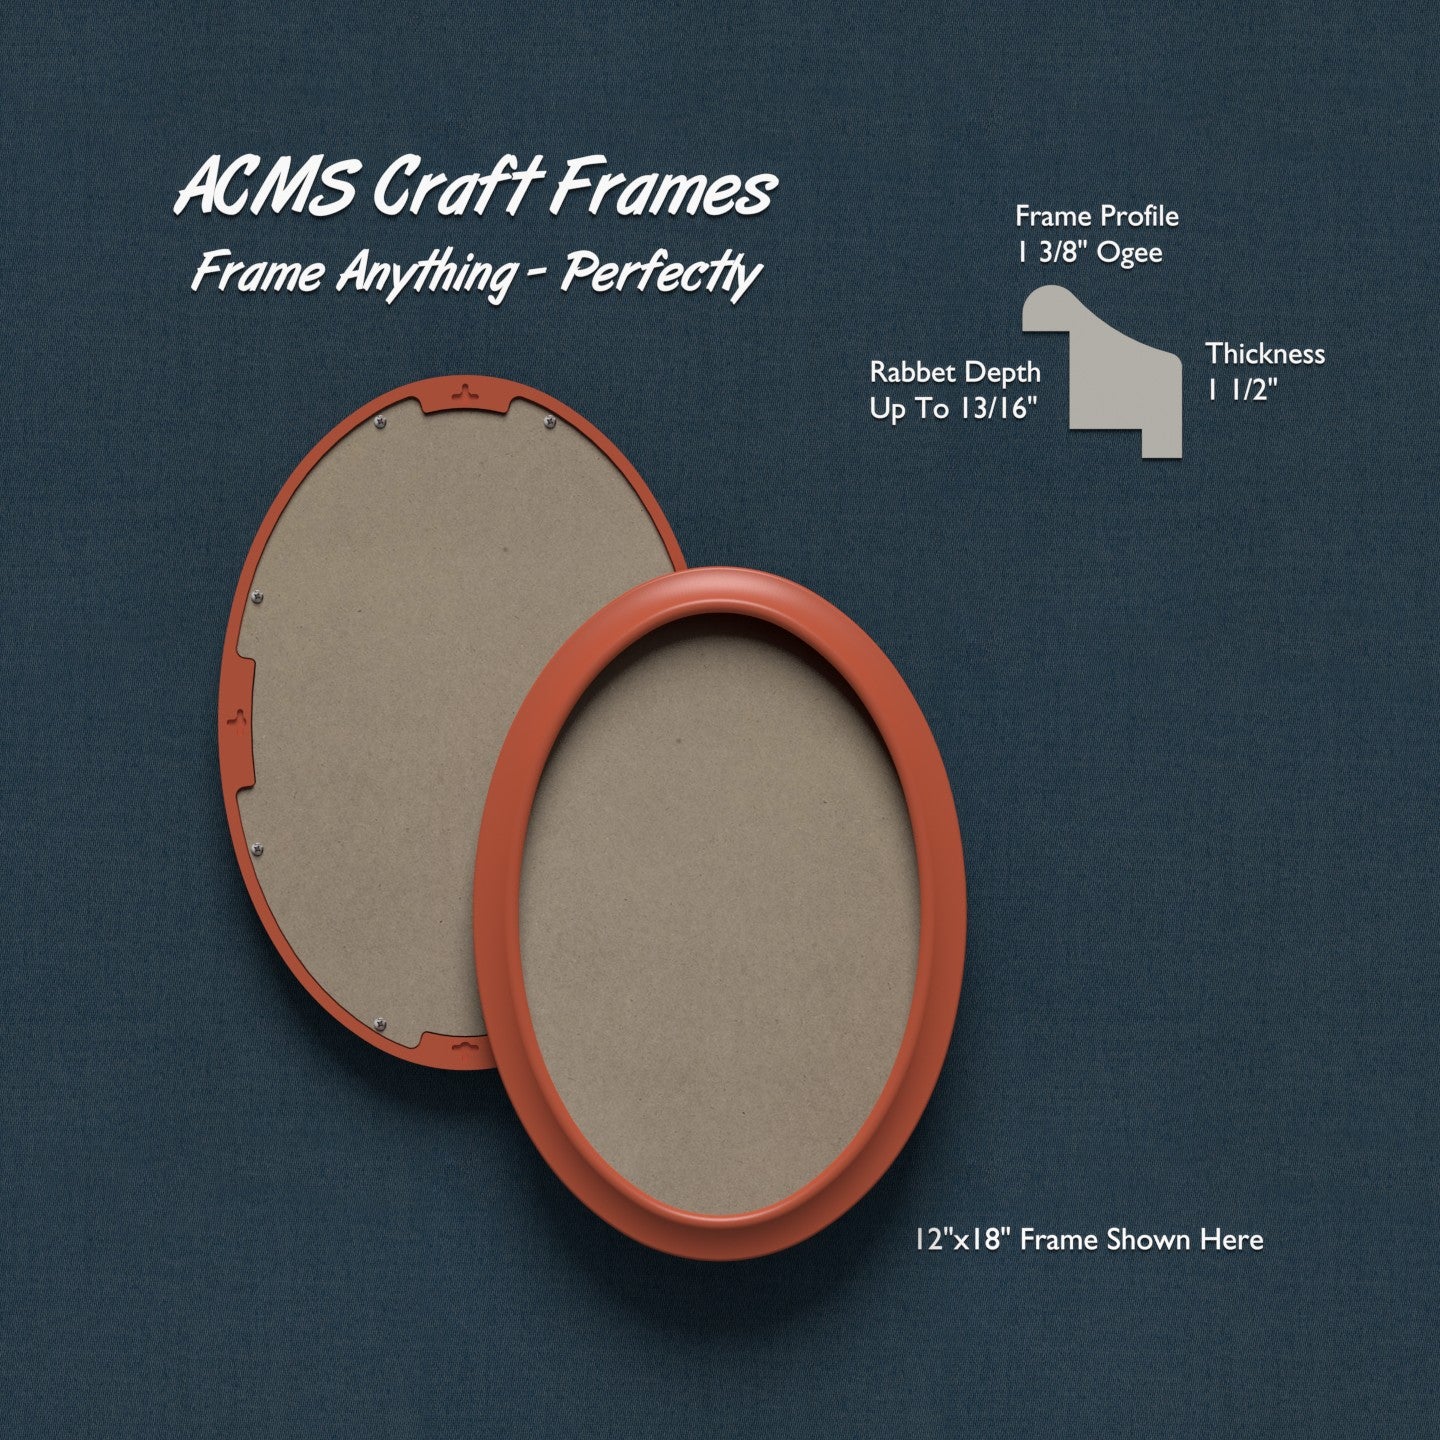 Oval Craft Frame - 1 1/2" Thick - 1 3/8" Ogee Profile